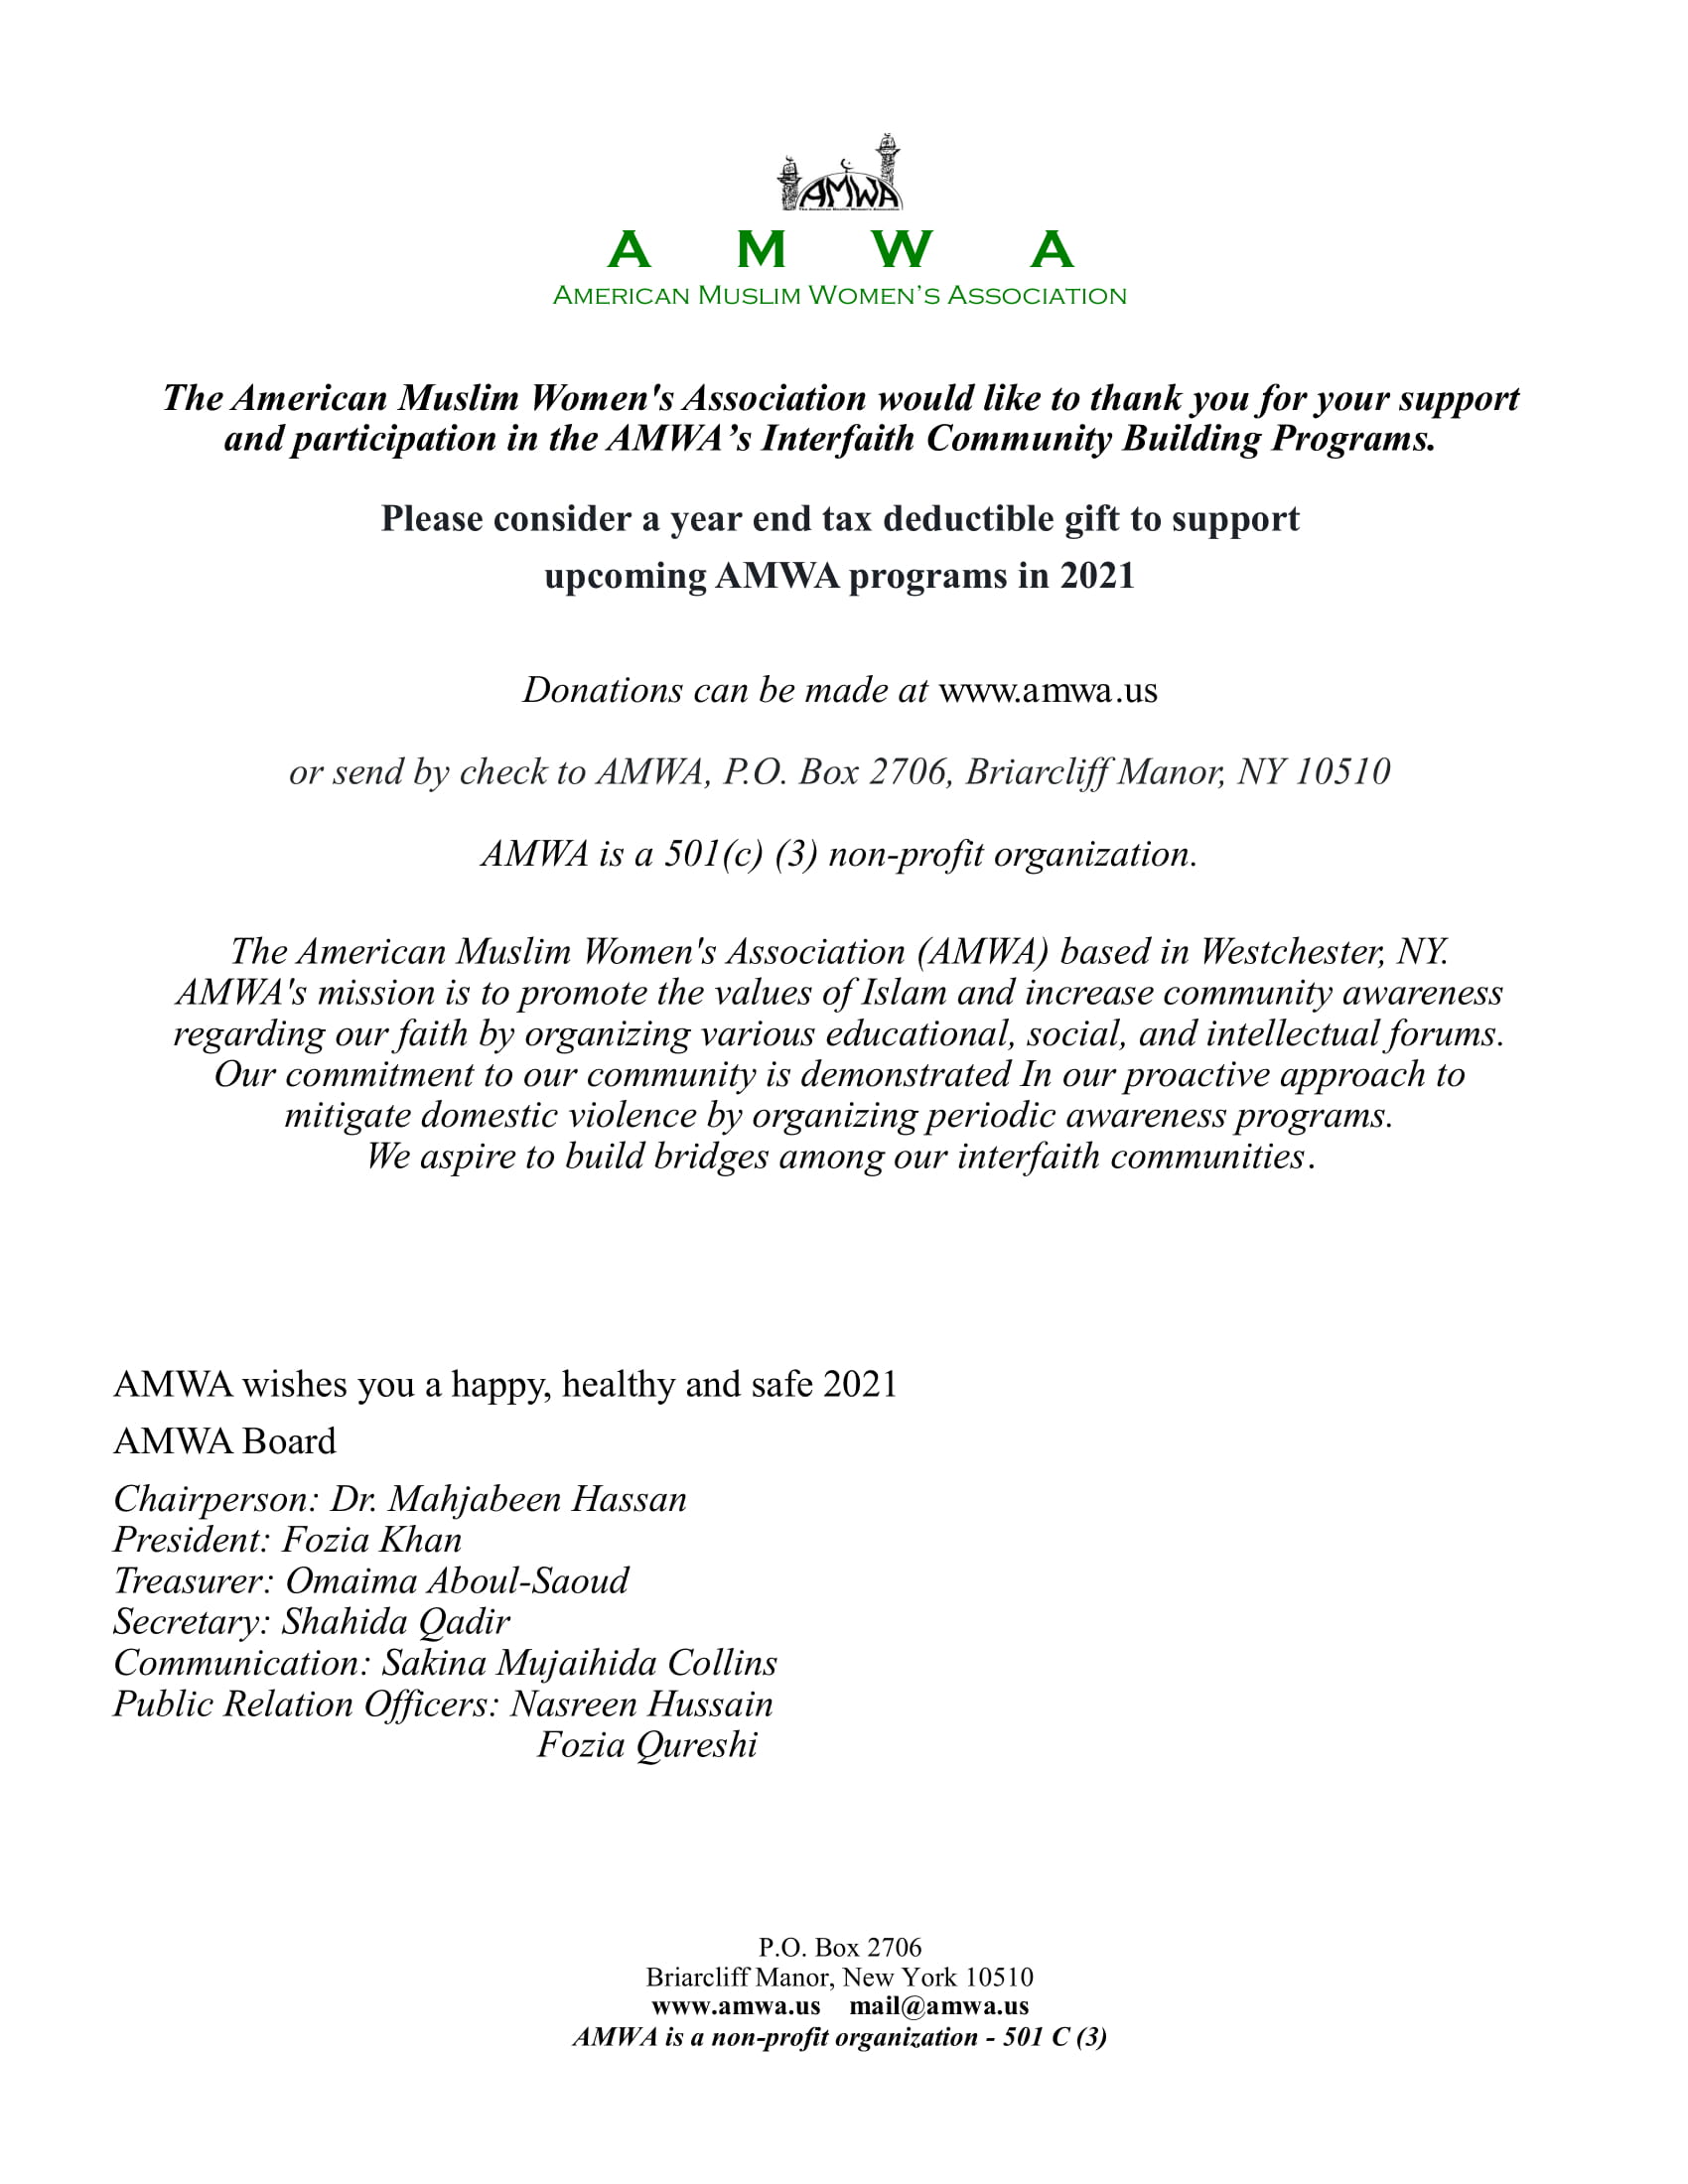 AMWA's End of year donation letter